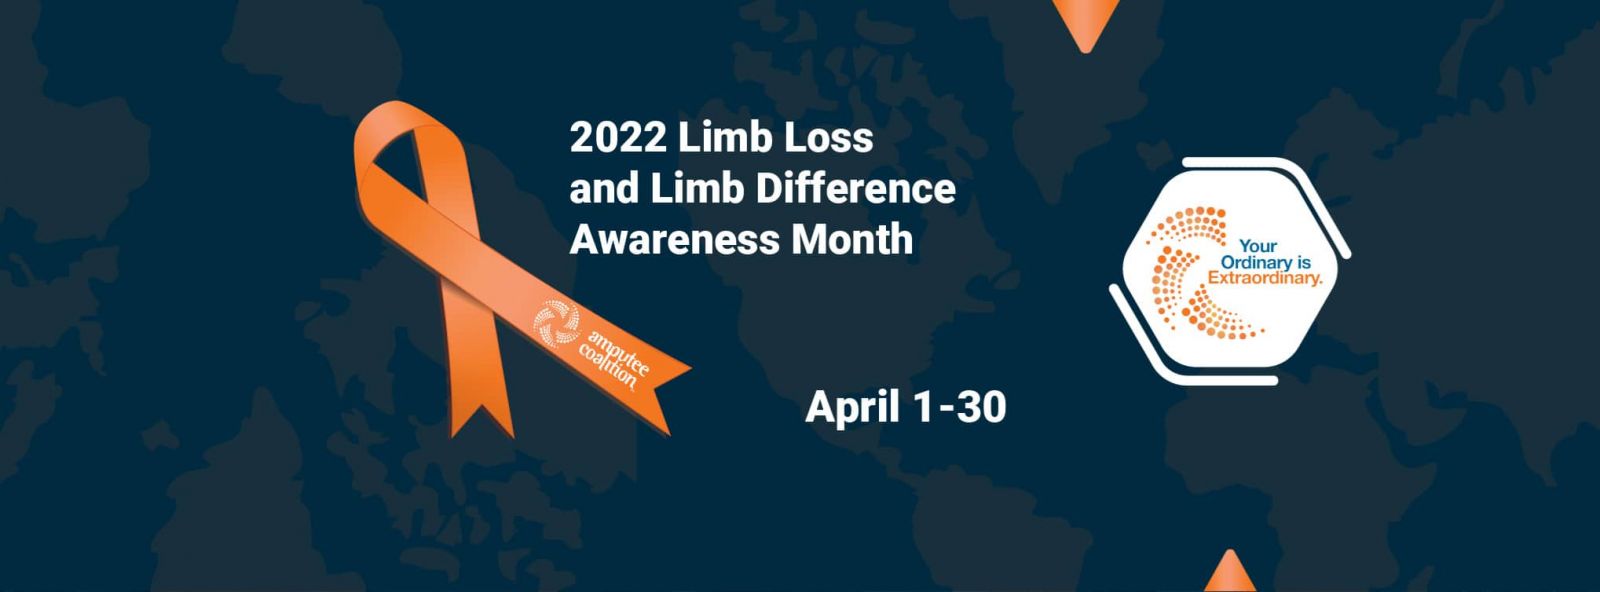 April is Limb Loss and Limb Difference Awareness Month